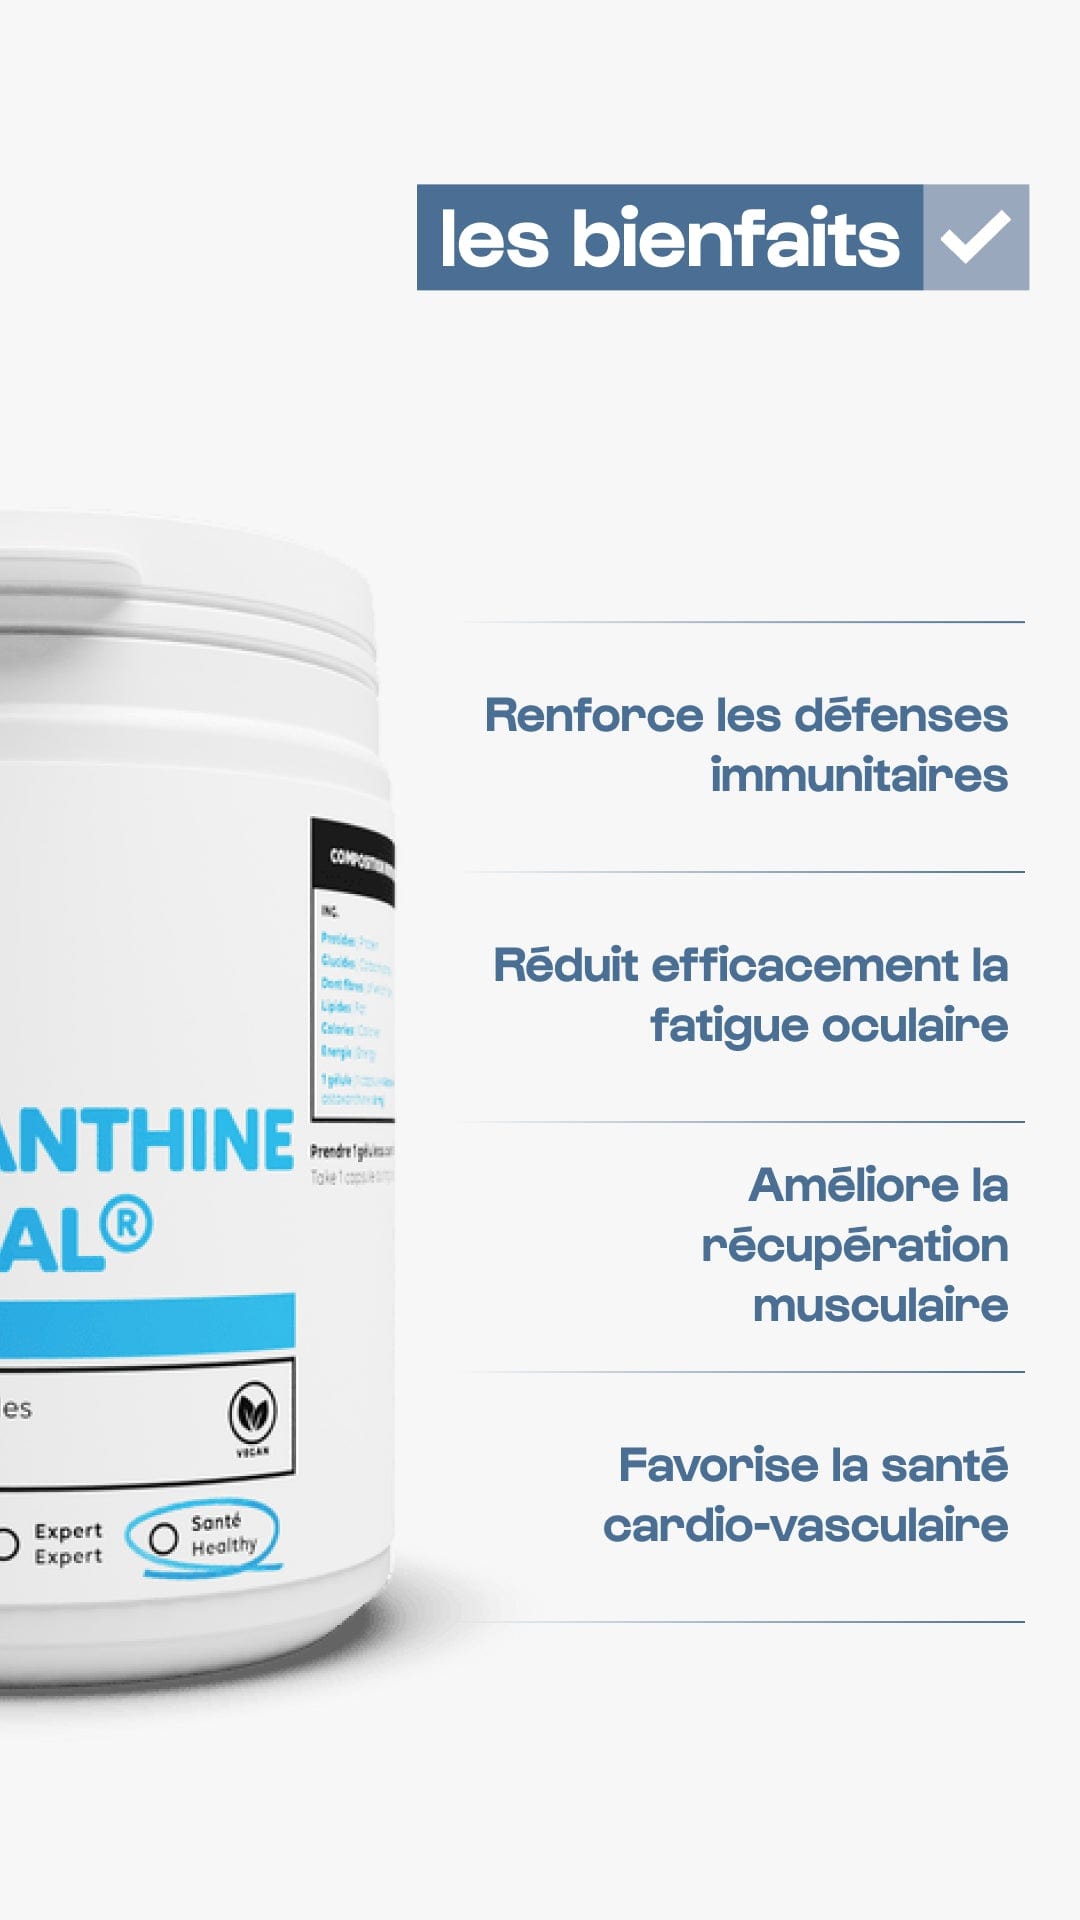 Nutrimuscle Nutriments Astaxanthine Astareal®